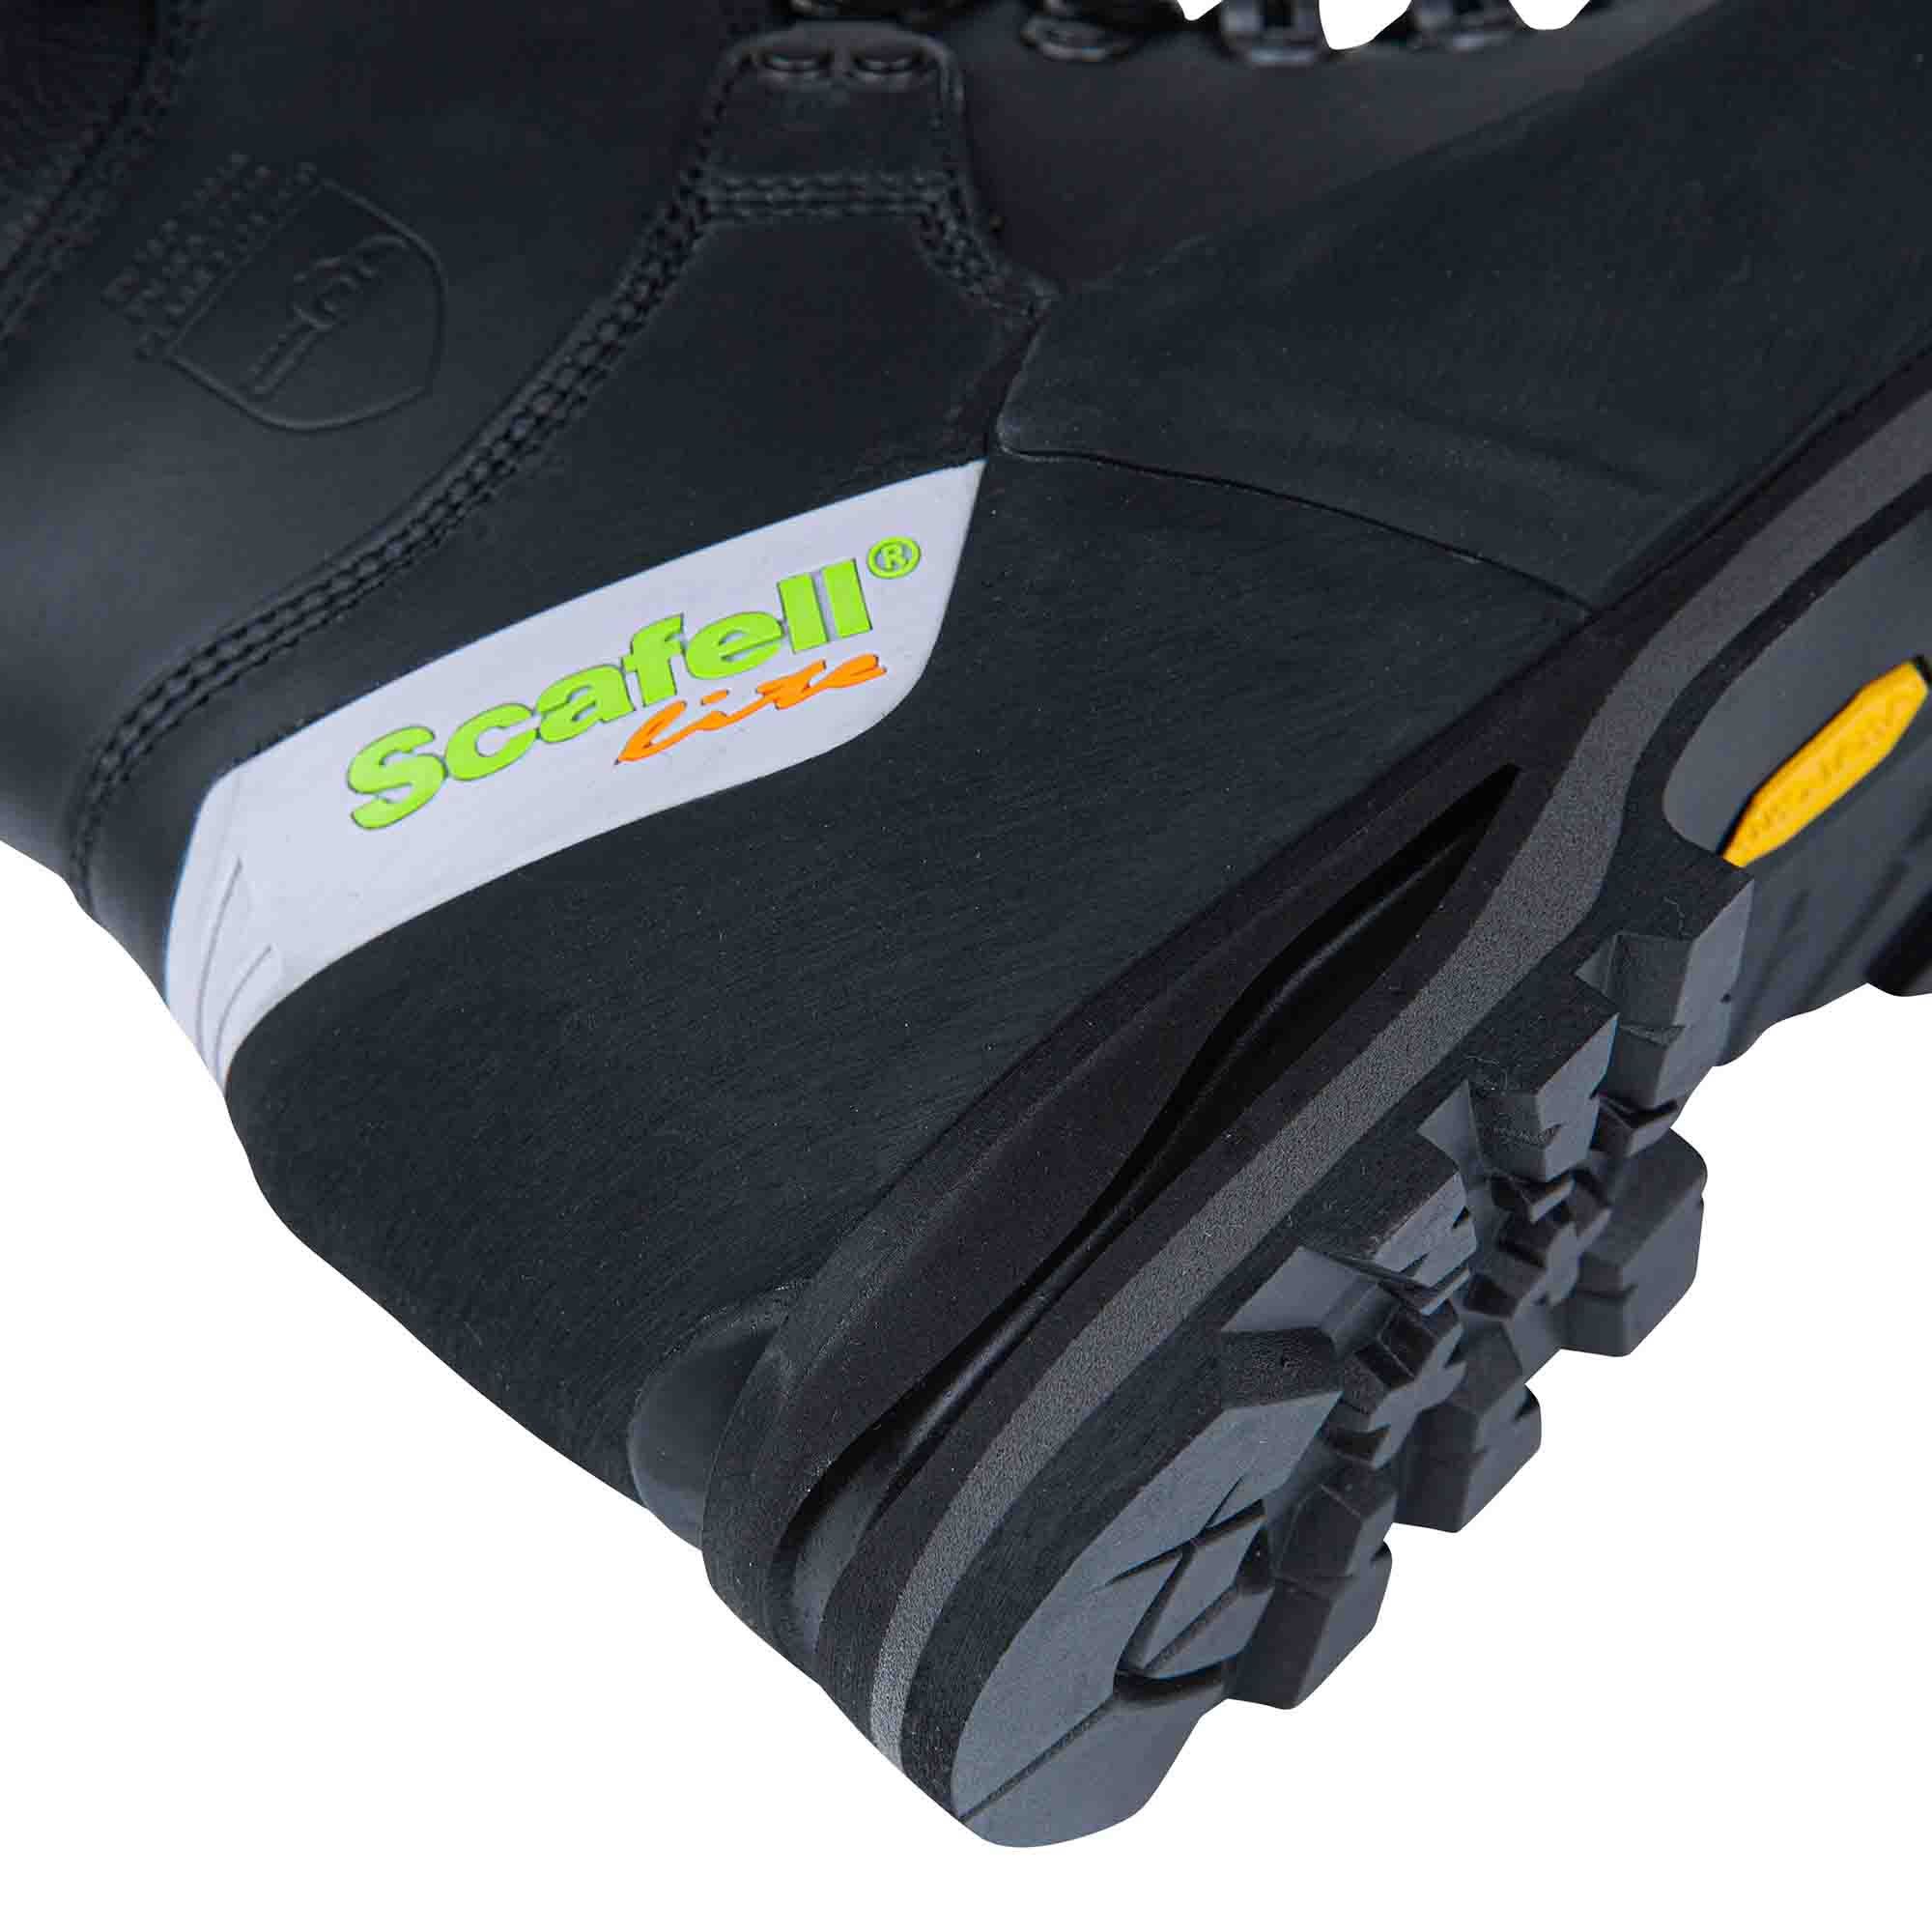 Arbortec AT33100 Scafell Lite Chain Saw Boots Class 2 Black